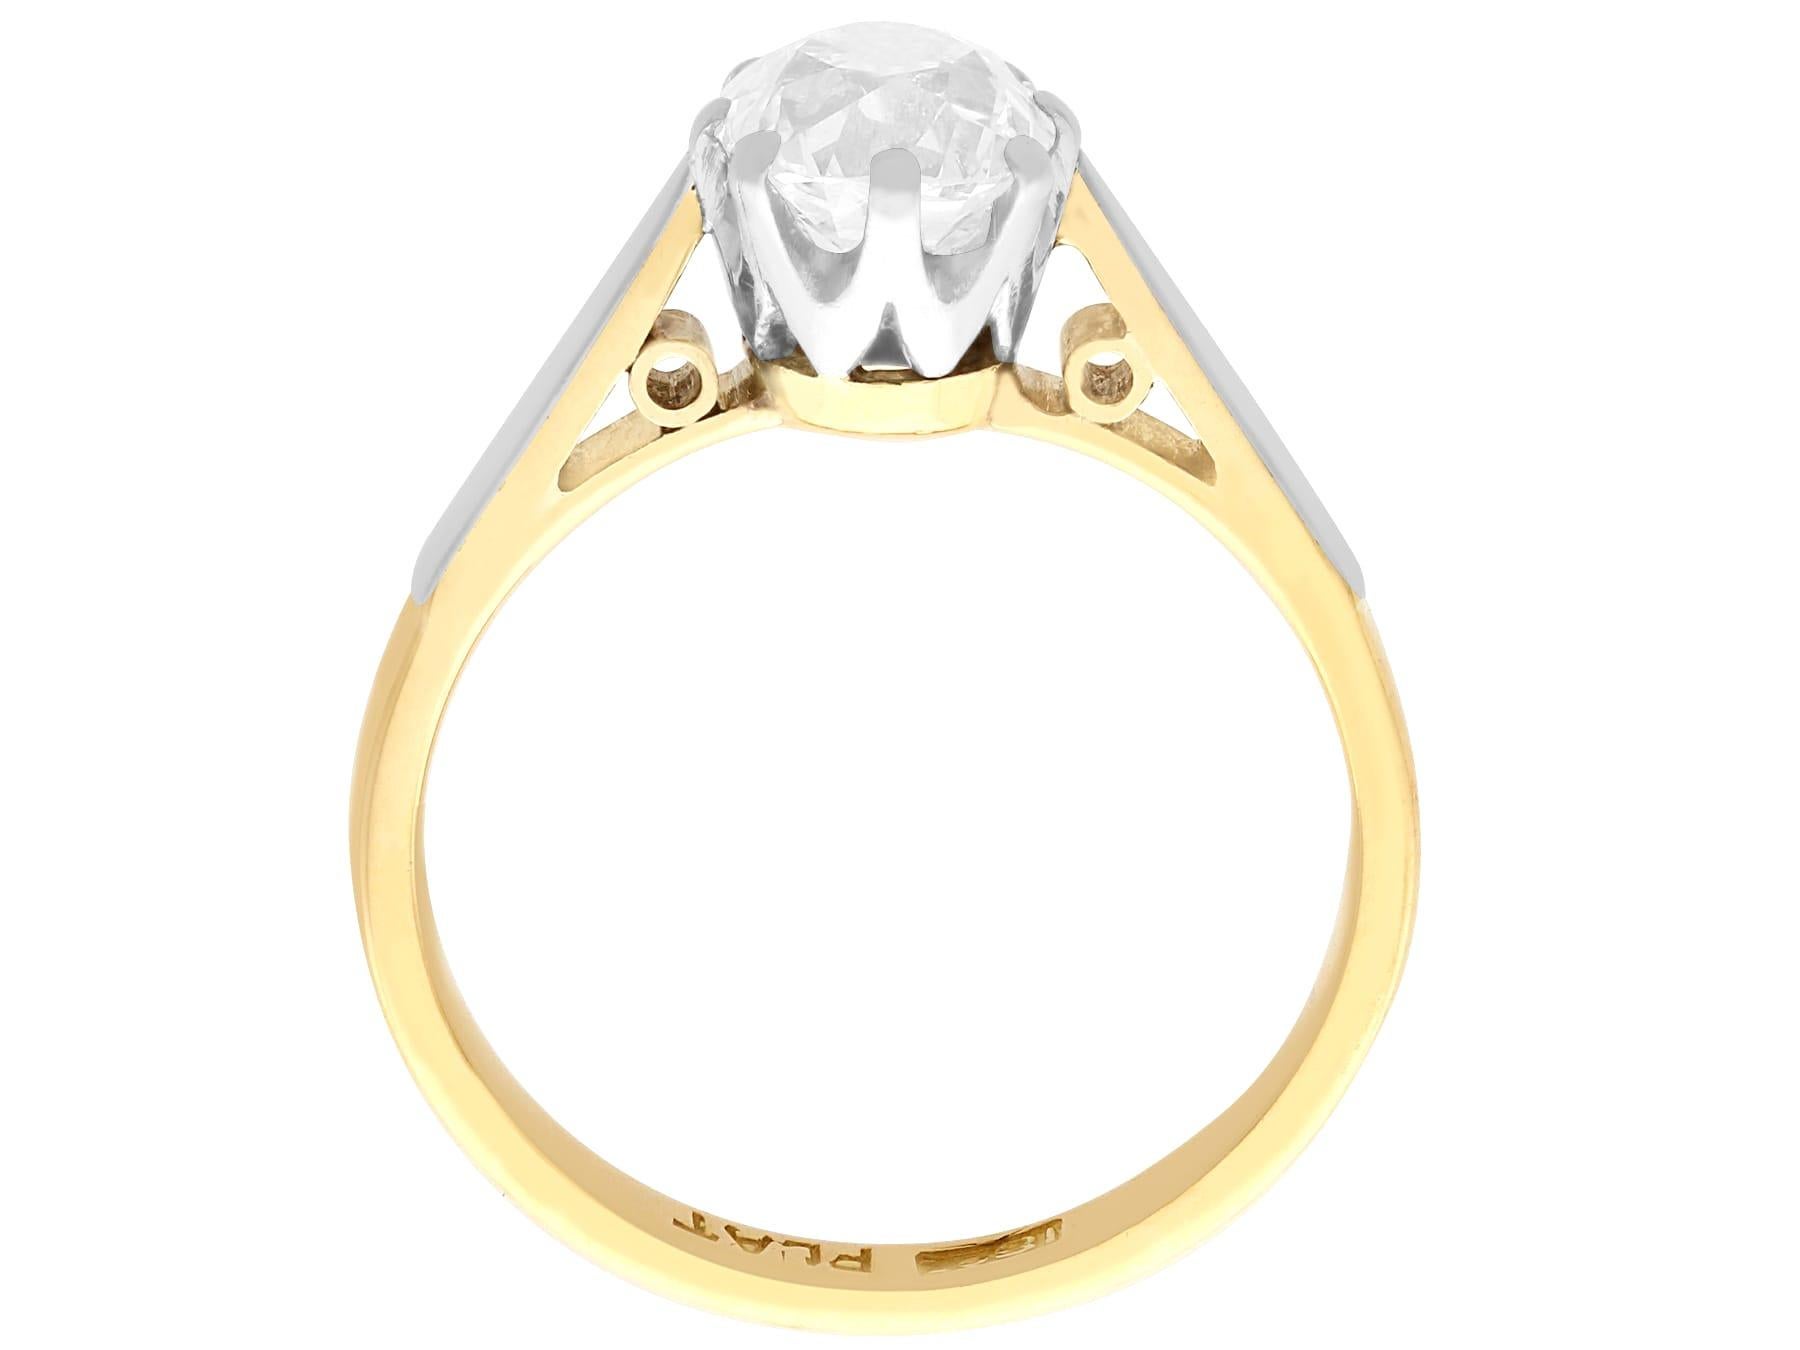 Antique 1.23 Carat Diamond and 18k Yellow Gold Solitaire Ring, circa 1910 For Sale 1